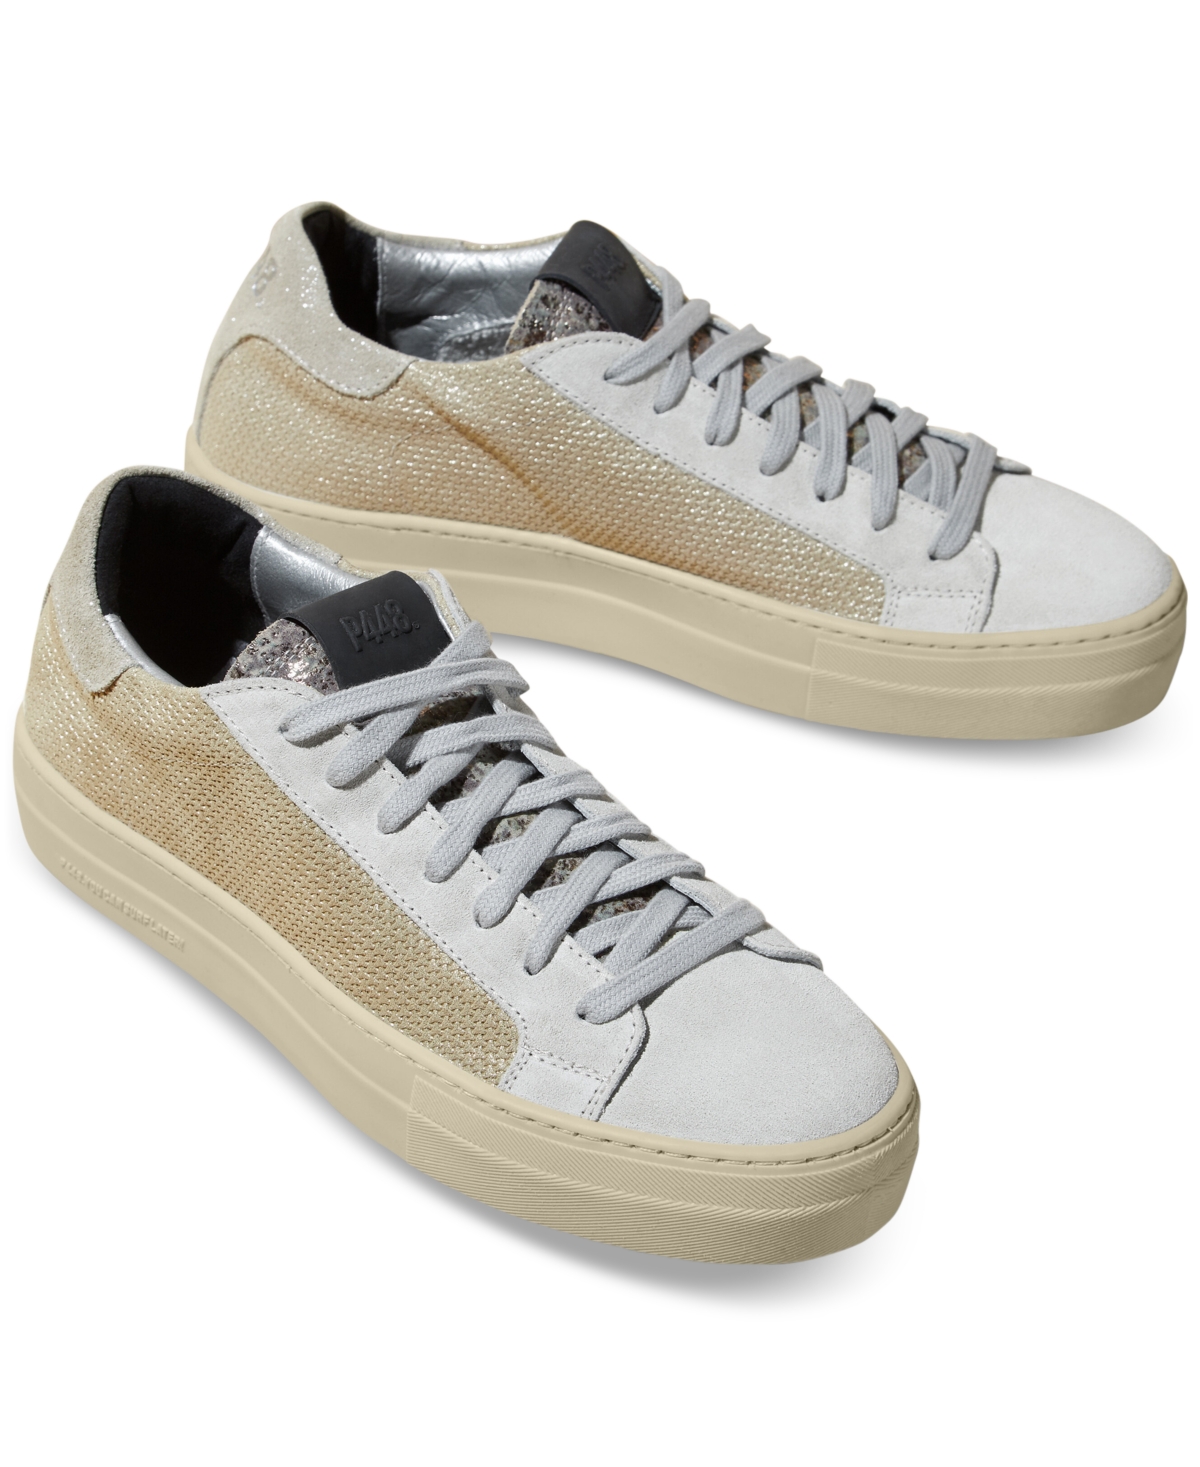 Women's Thea Lace-Up Low-Top Sneakers - Fujy